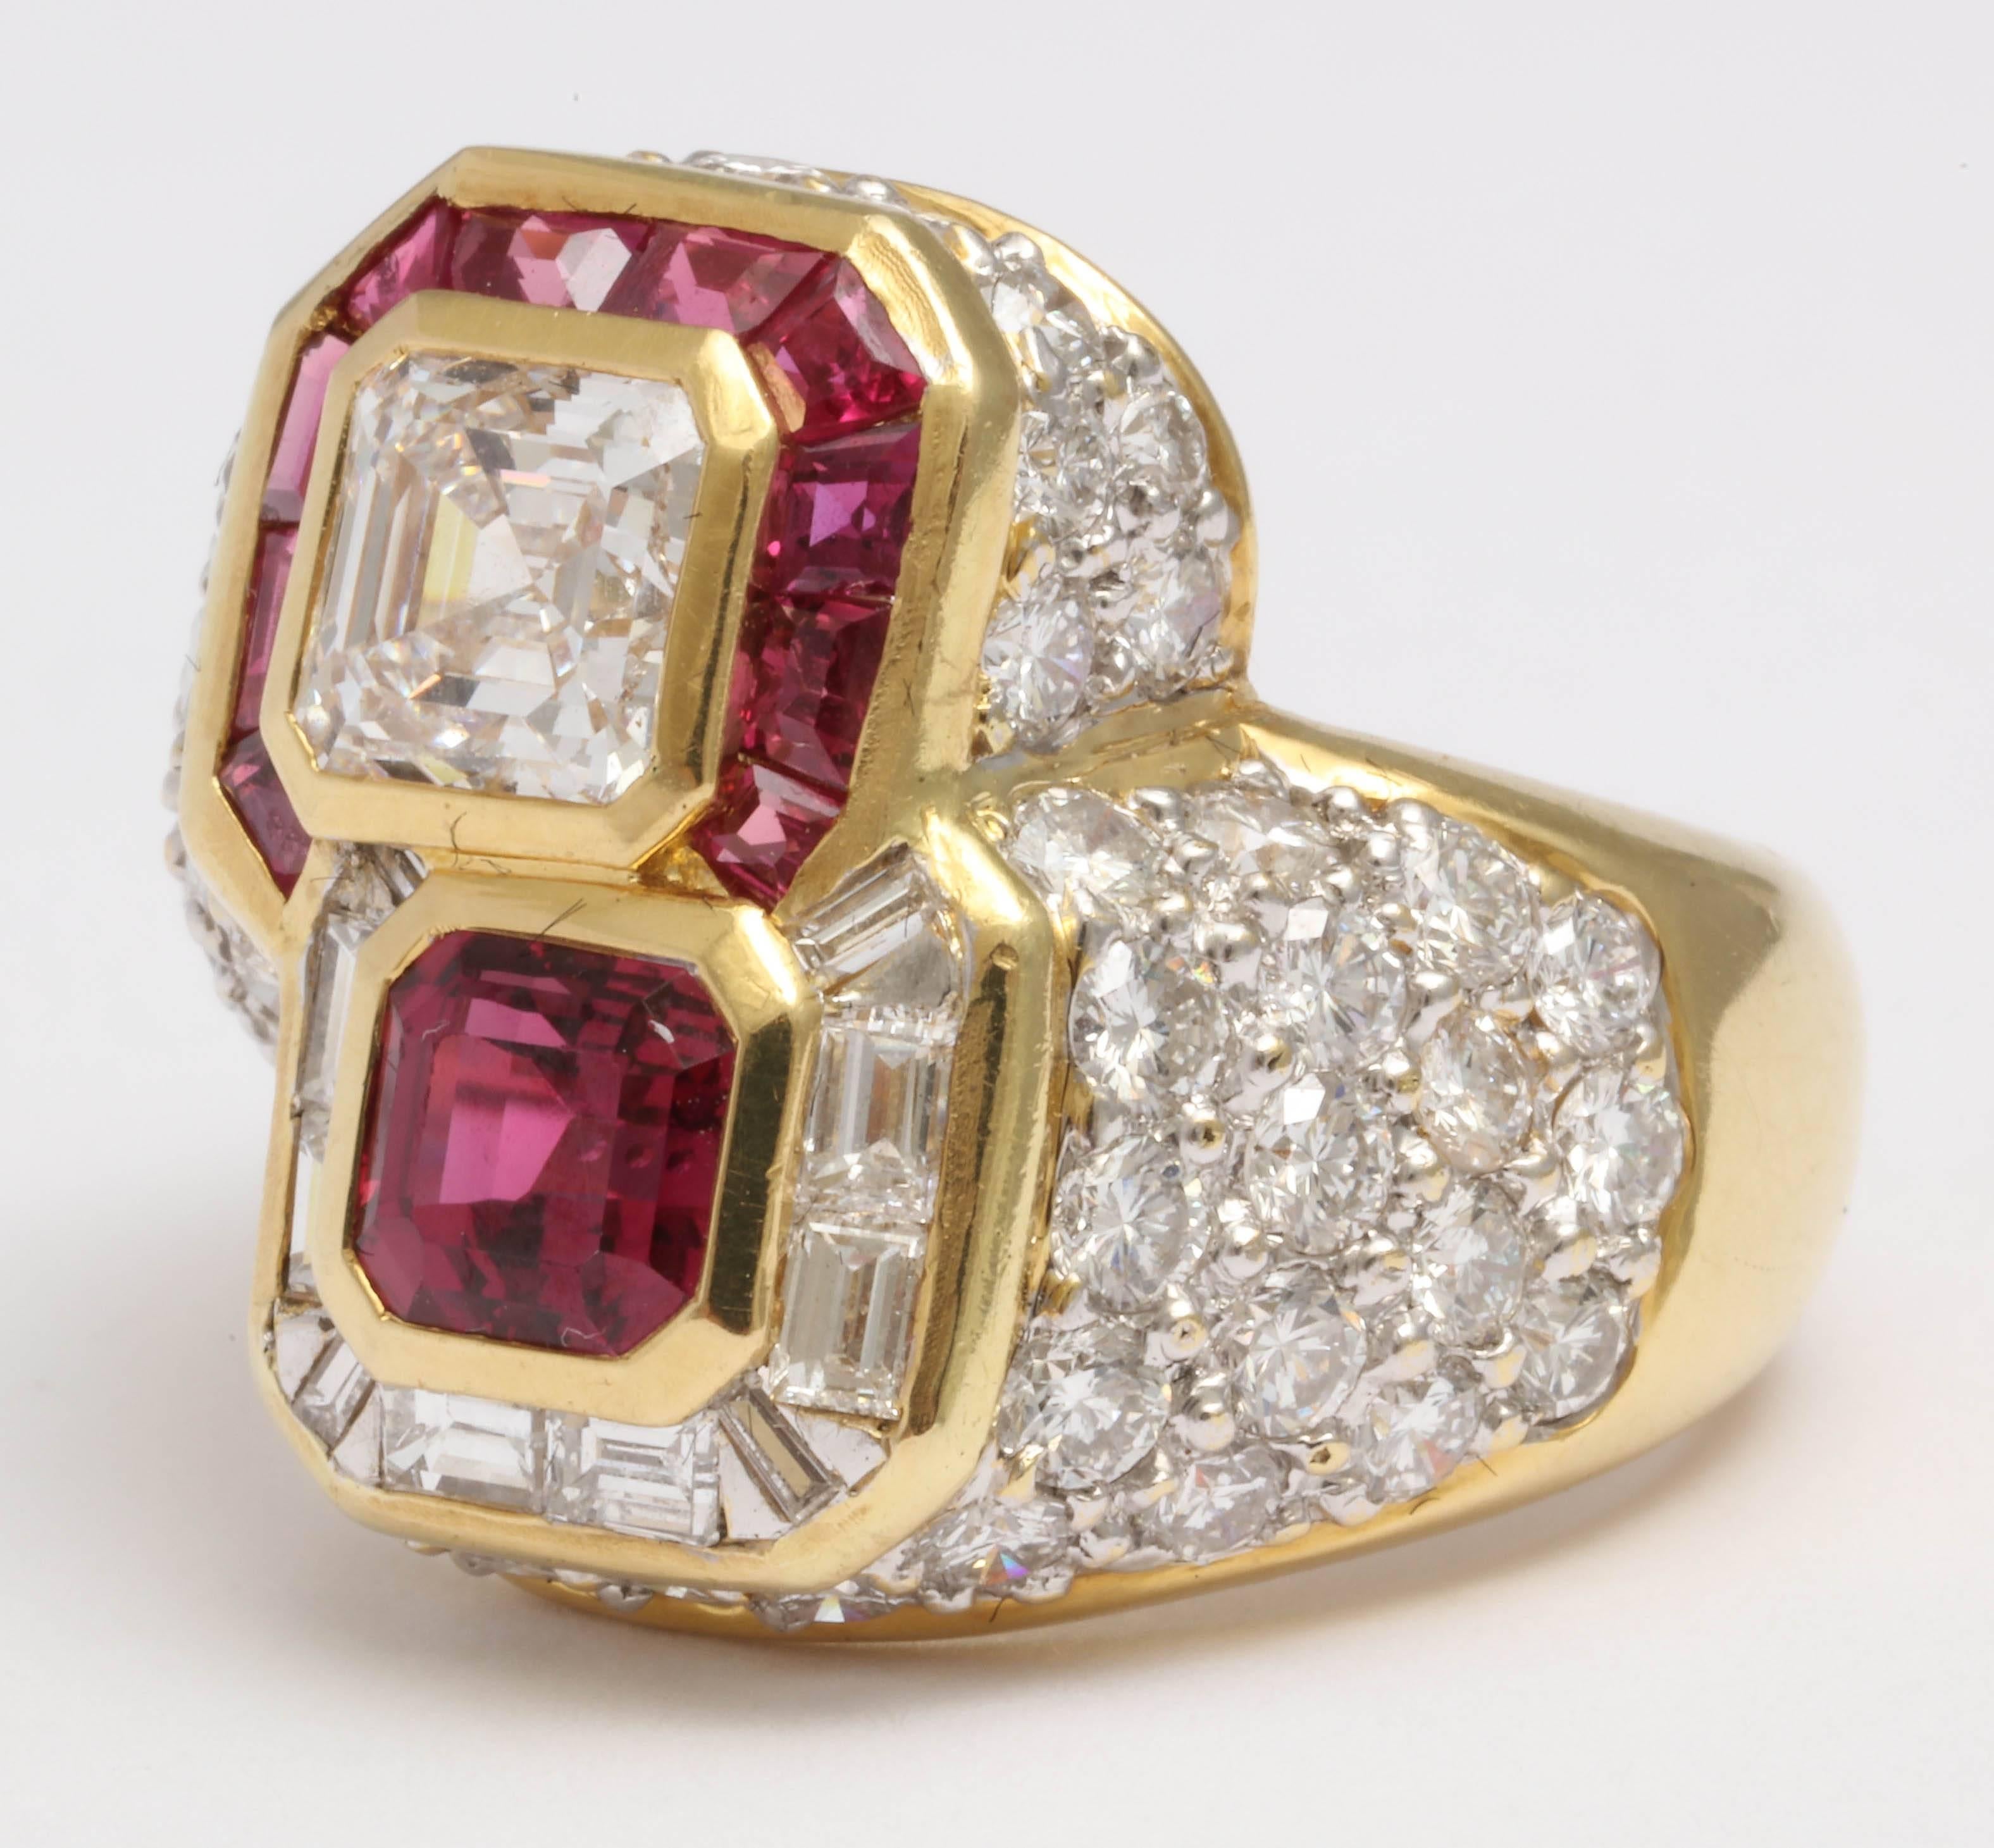 Sumptuous Asher cut Diamond - weighing approximately 1.25cts surrounded by fancy cut Rubies, opposed by an approximately 90pt cushion cut square Ruby surrounded by Diamond Baguettes.  Signed Marshall and 750. Shank is pave set wit fine, full cut,